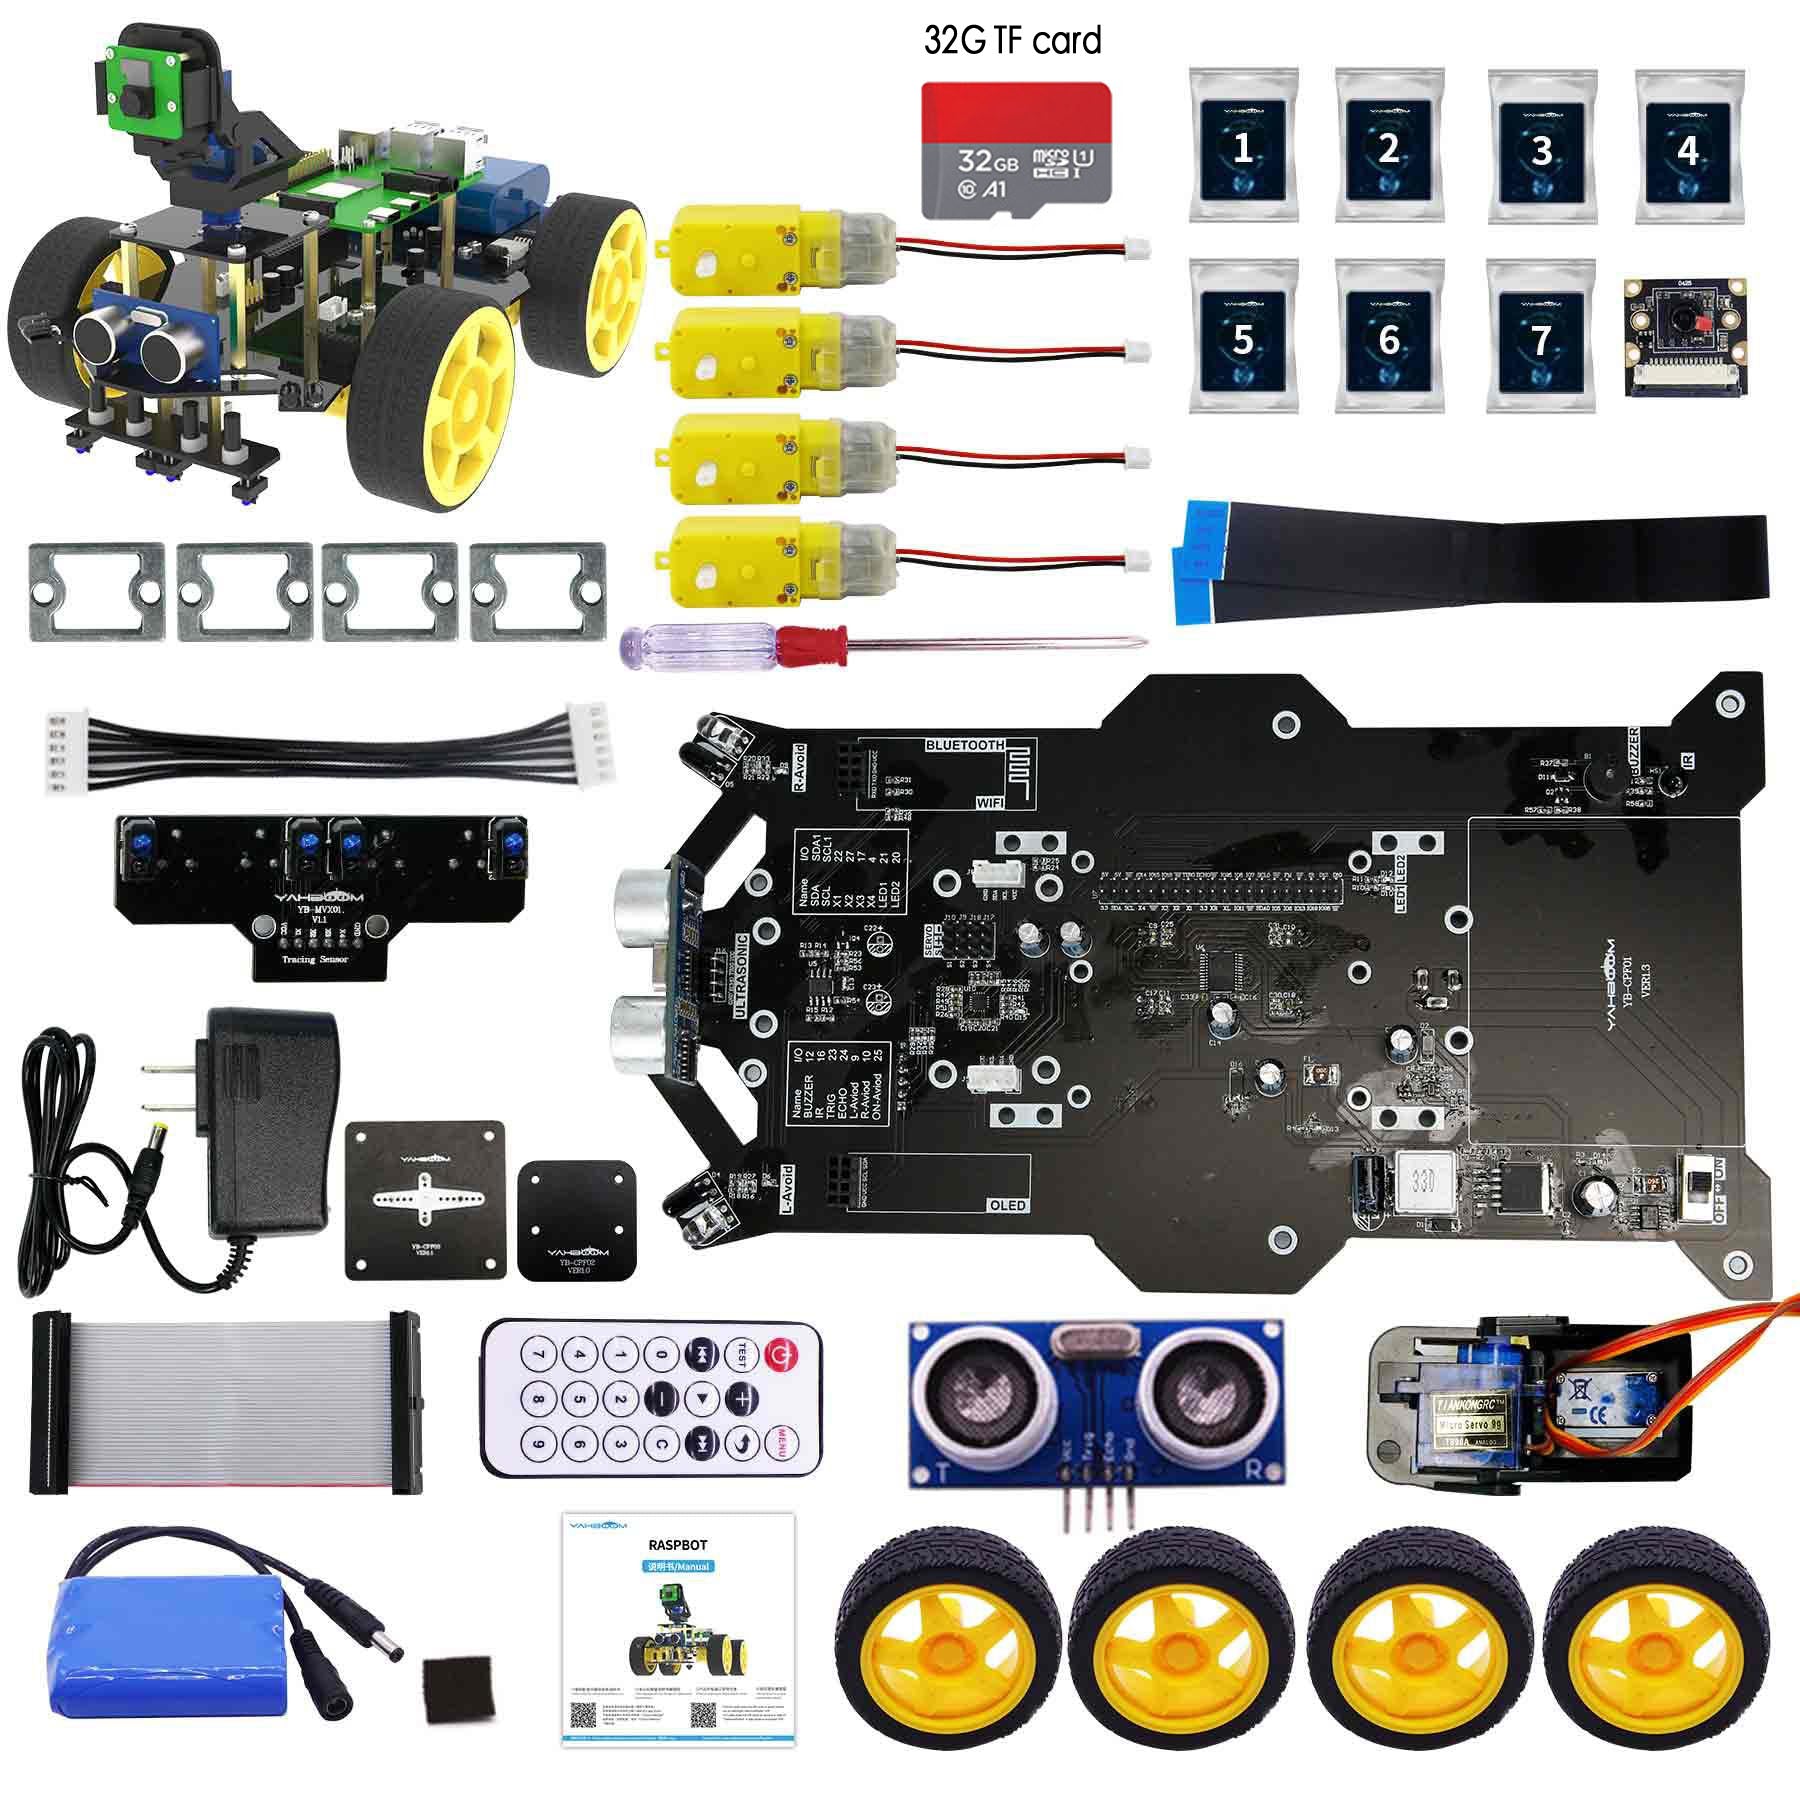 Yahboom Raspbot AI Vision STEM Education Robot Car with FPV Camera for Raspberry Pi 4B